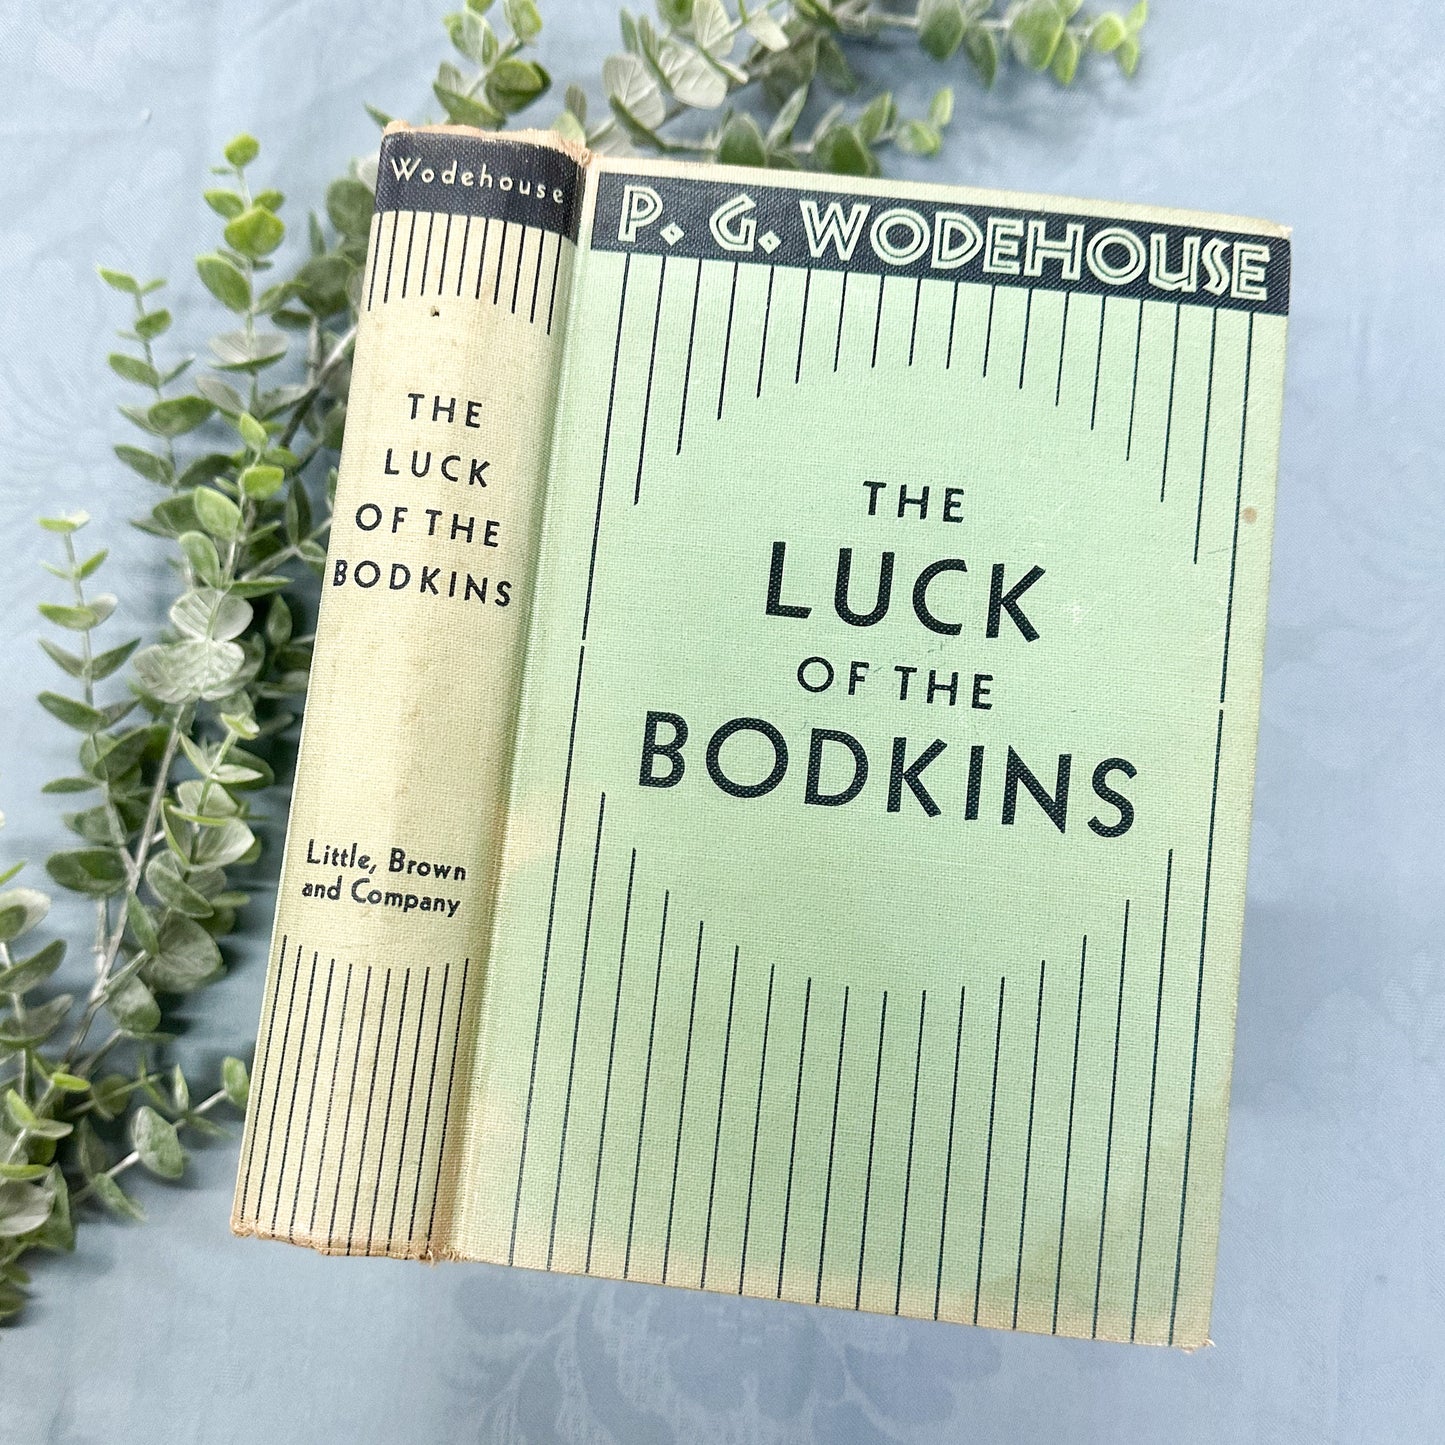 The Luck of the Bodkins by P.G. Wodehouse